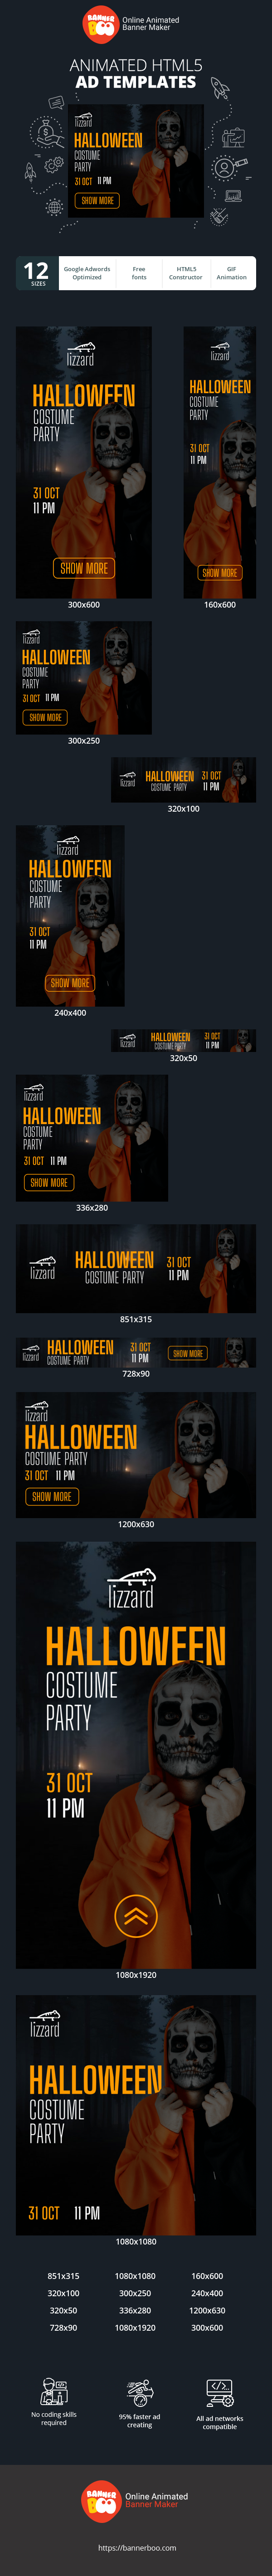 Banner ad template — Halloween Costume Party — 31 Oct 11 Pm